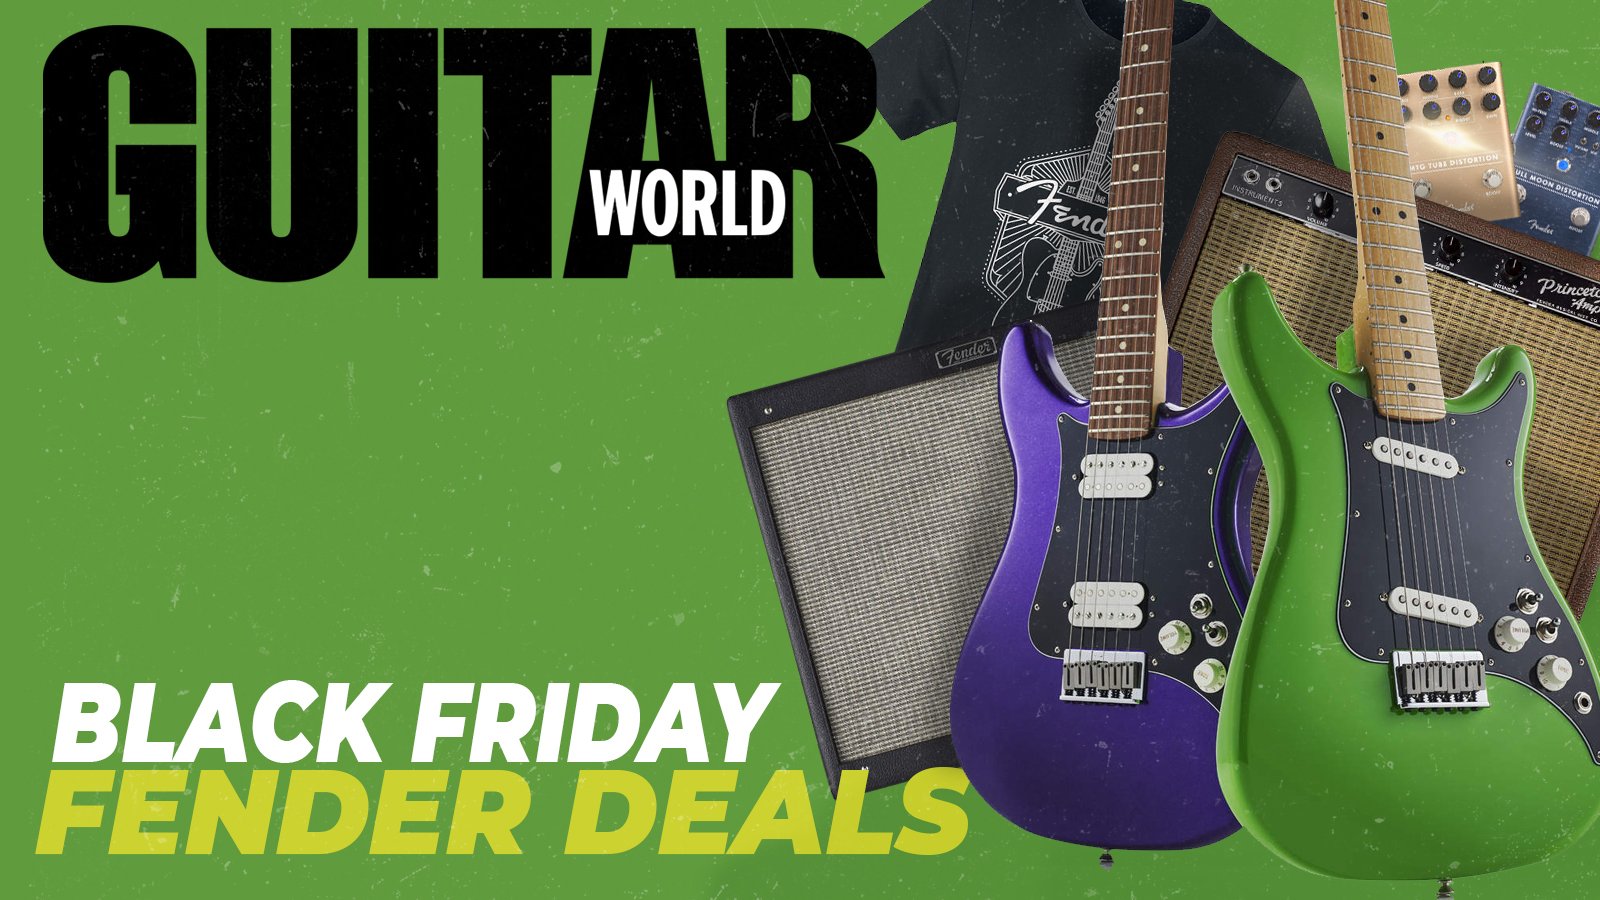 Shaded Friday Fender deals 2022: the finest Fender sale of the year is now are residing